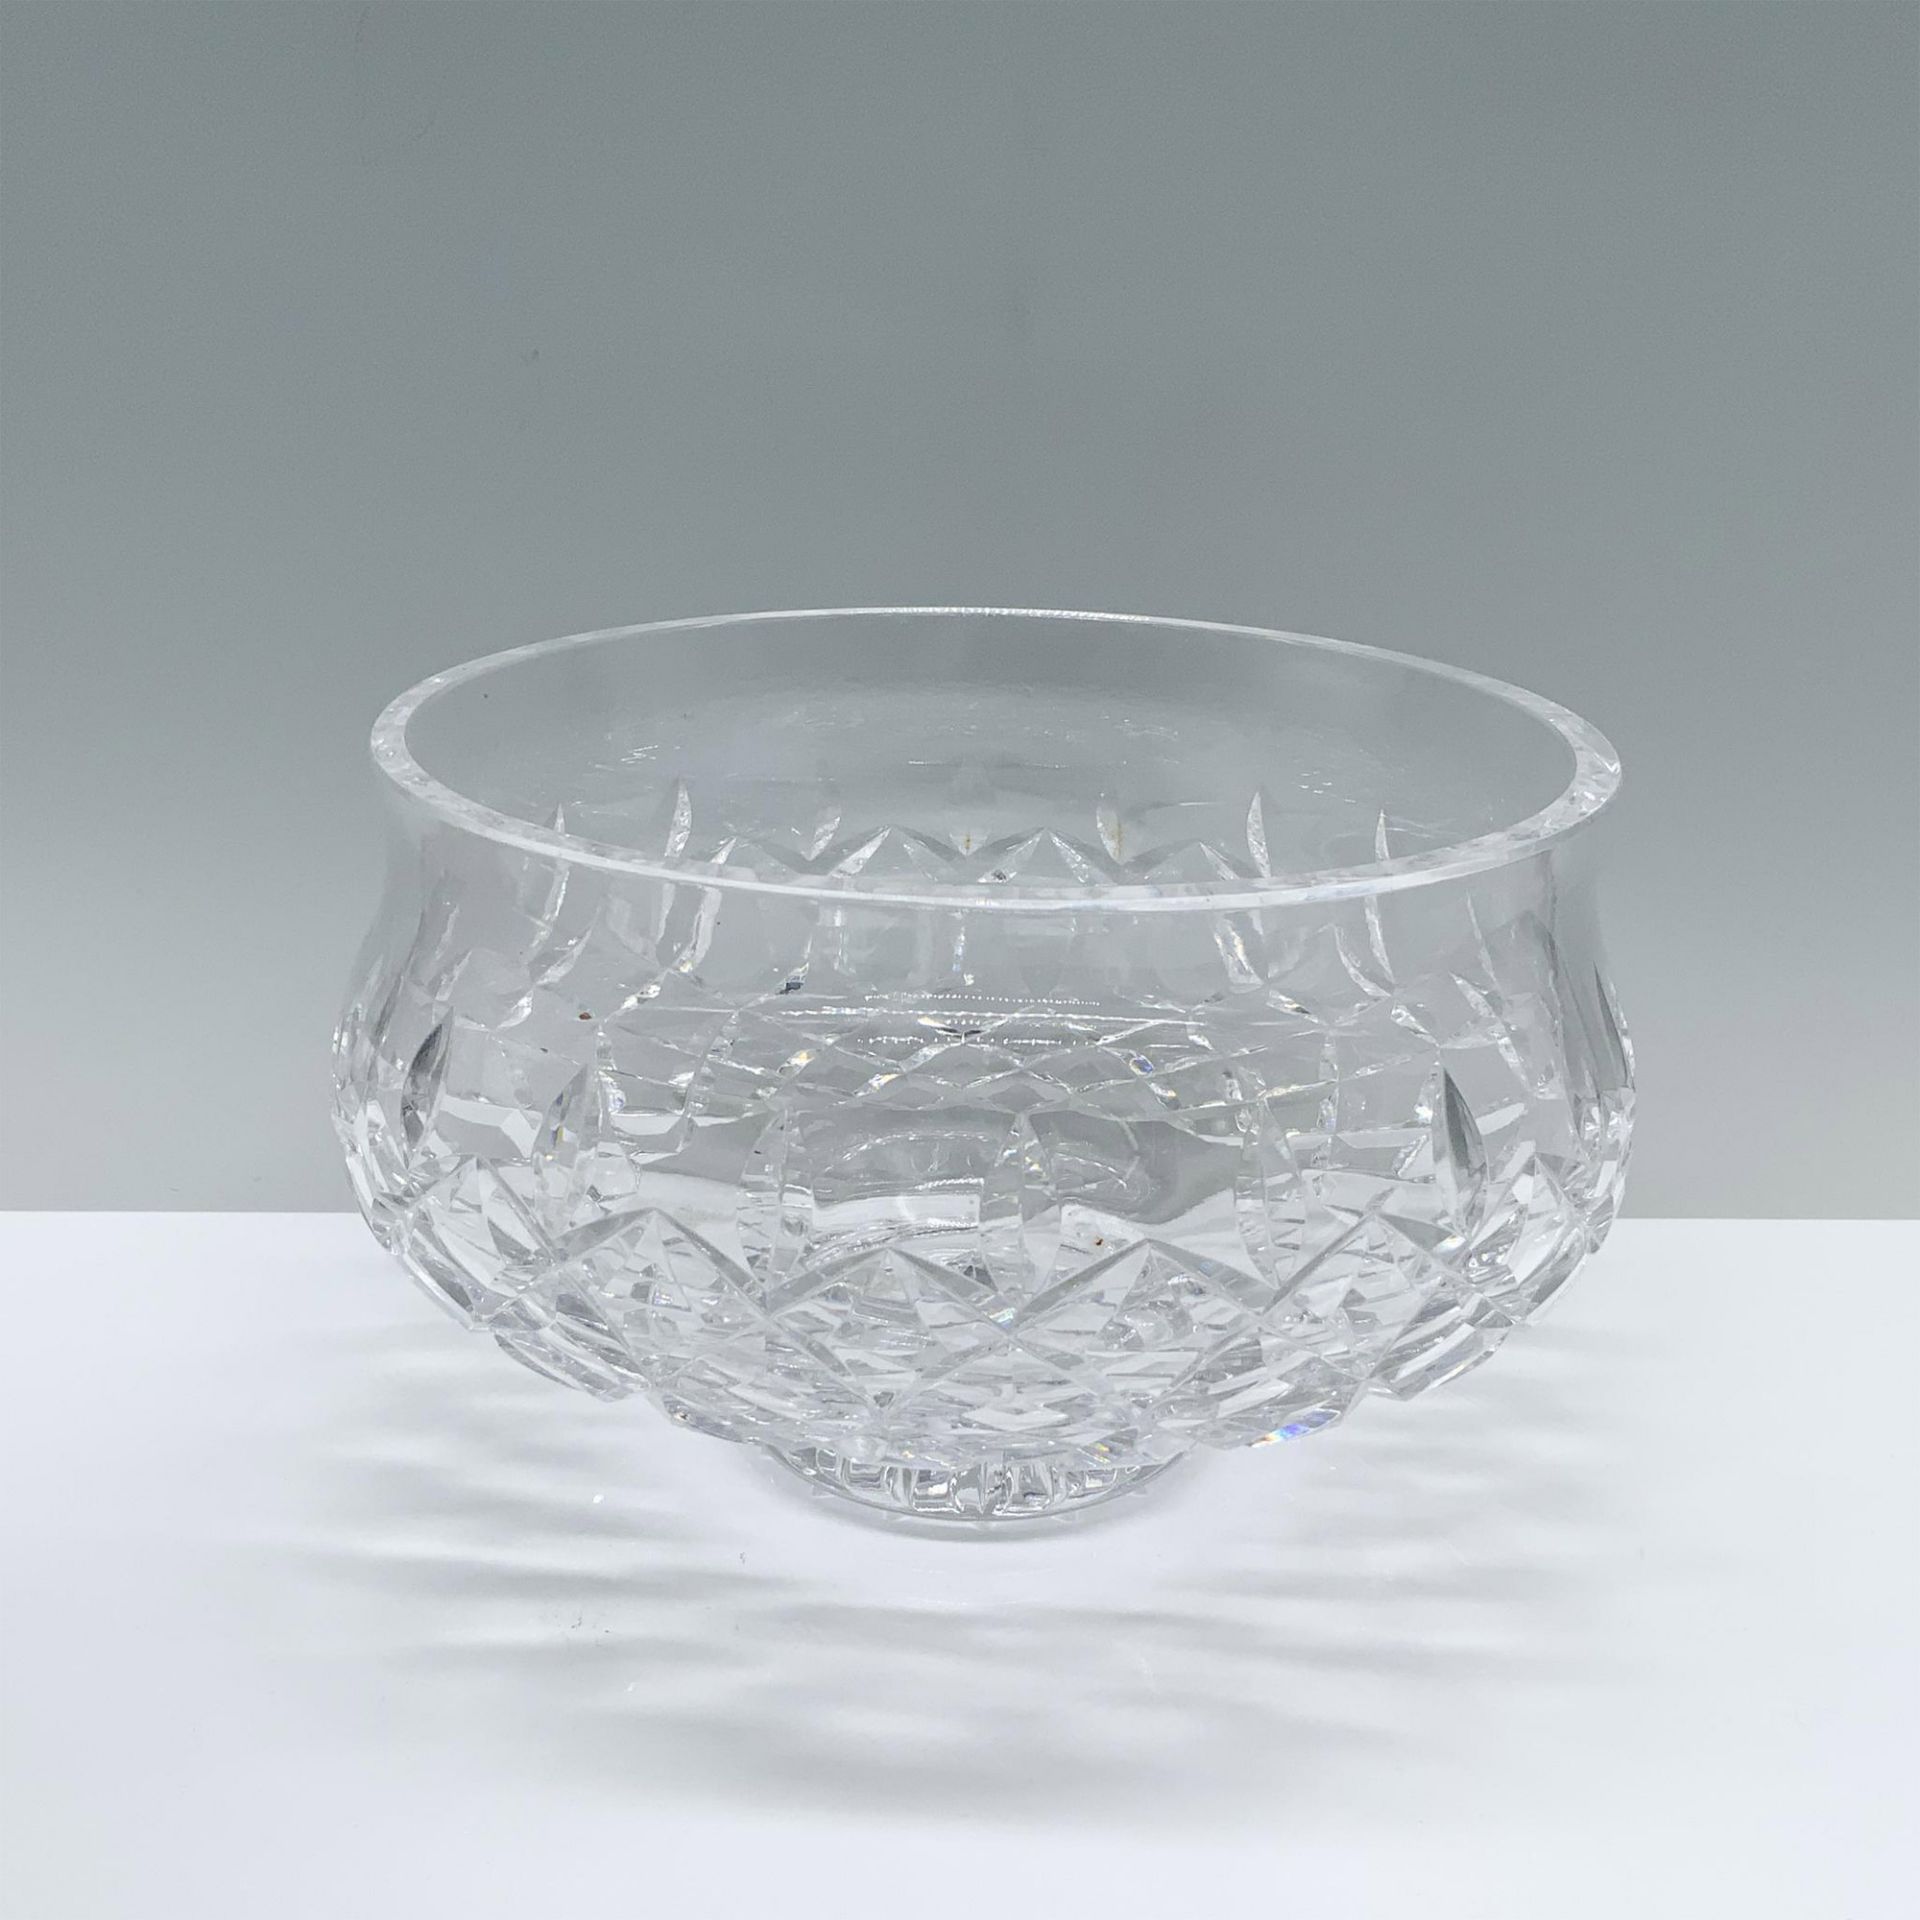 Waterford Crystal Footed Bowl, Lismore - Image 2 of 4